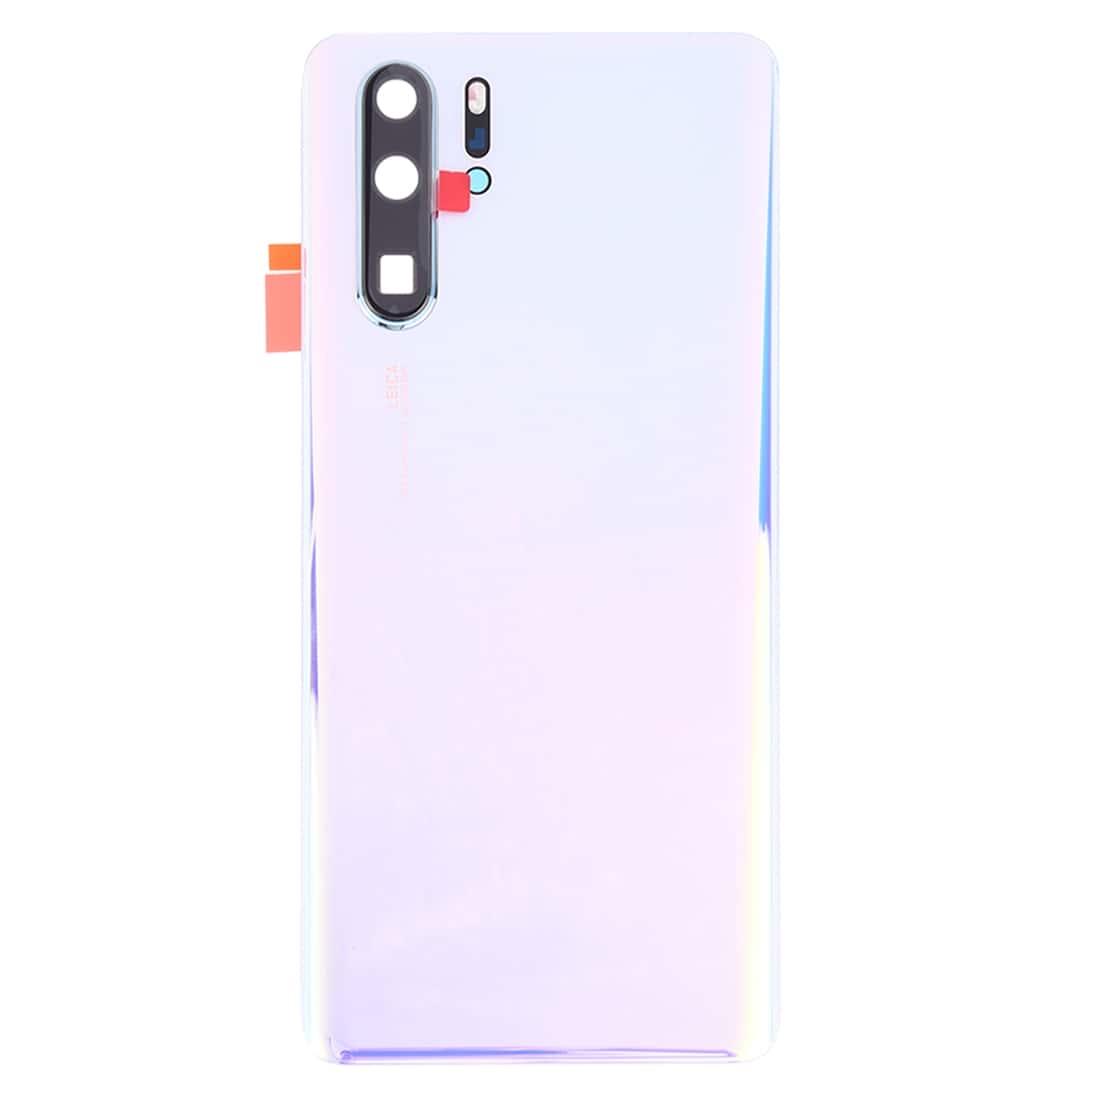 Back Glass Panel for Huawei P30 Pro Breathing Crystal with Camera Lens